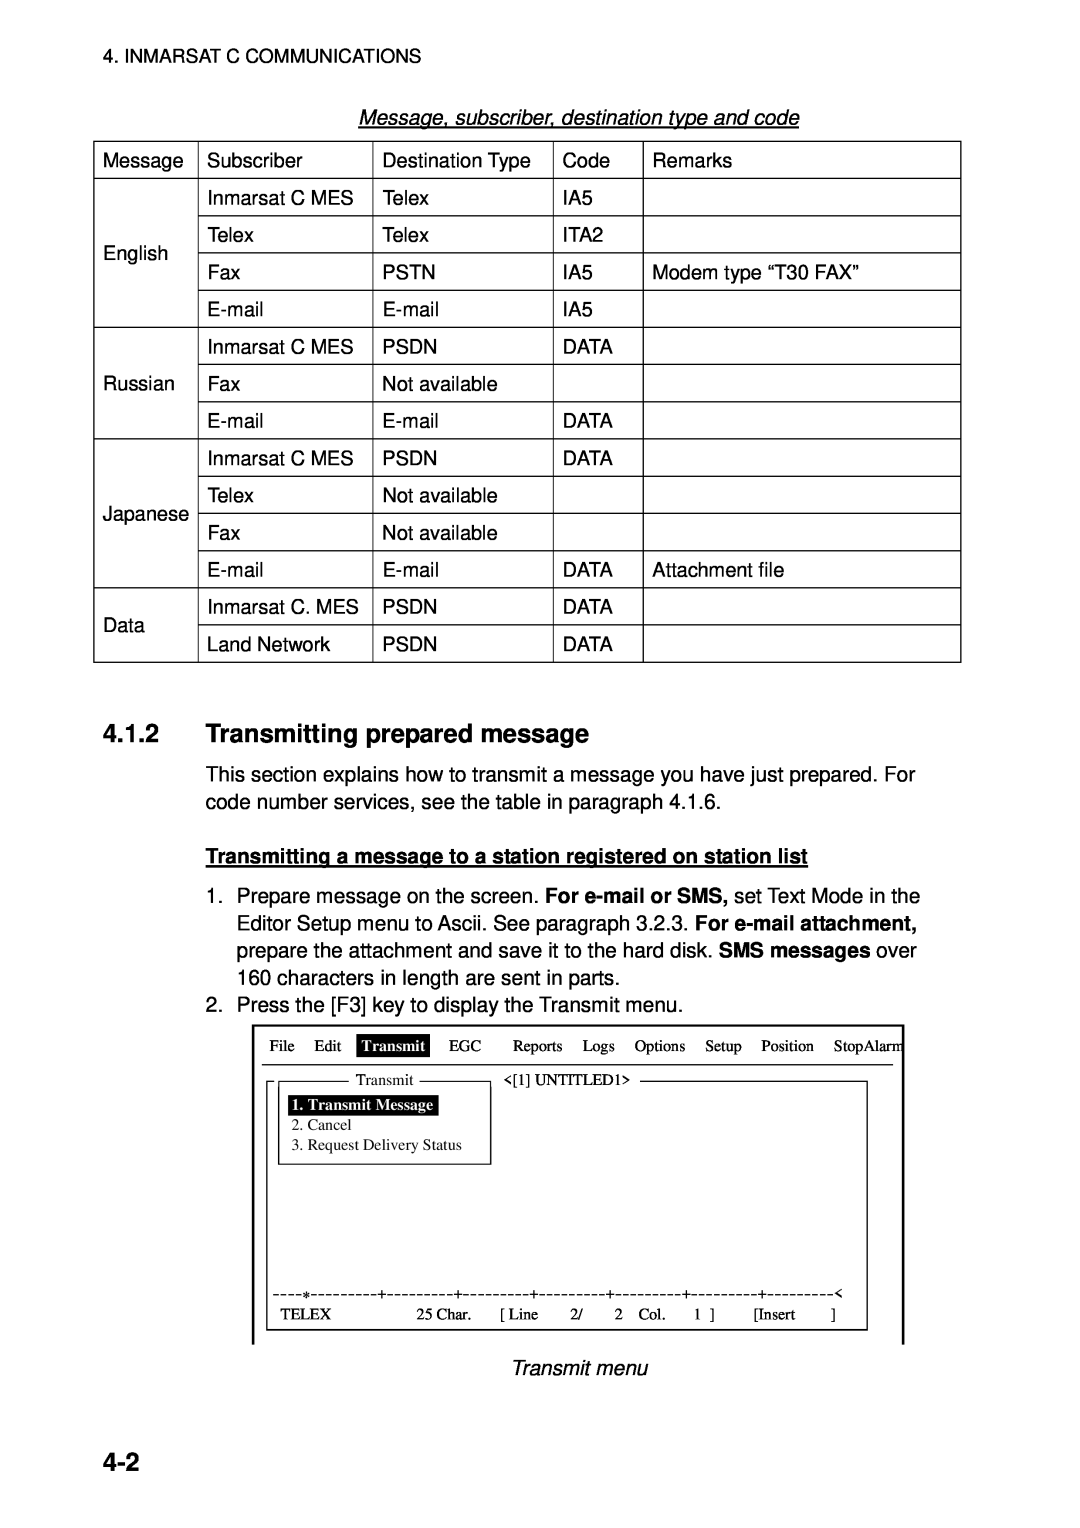 Furuno 16 manual Transmitting prepared message, Transmitting a message to a station registered on station list 